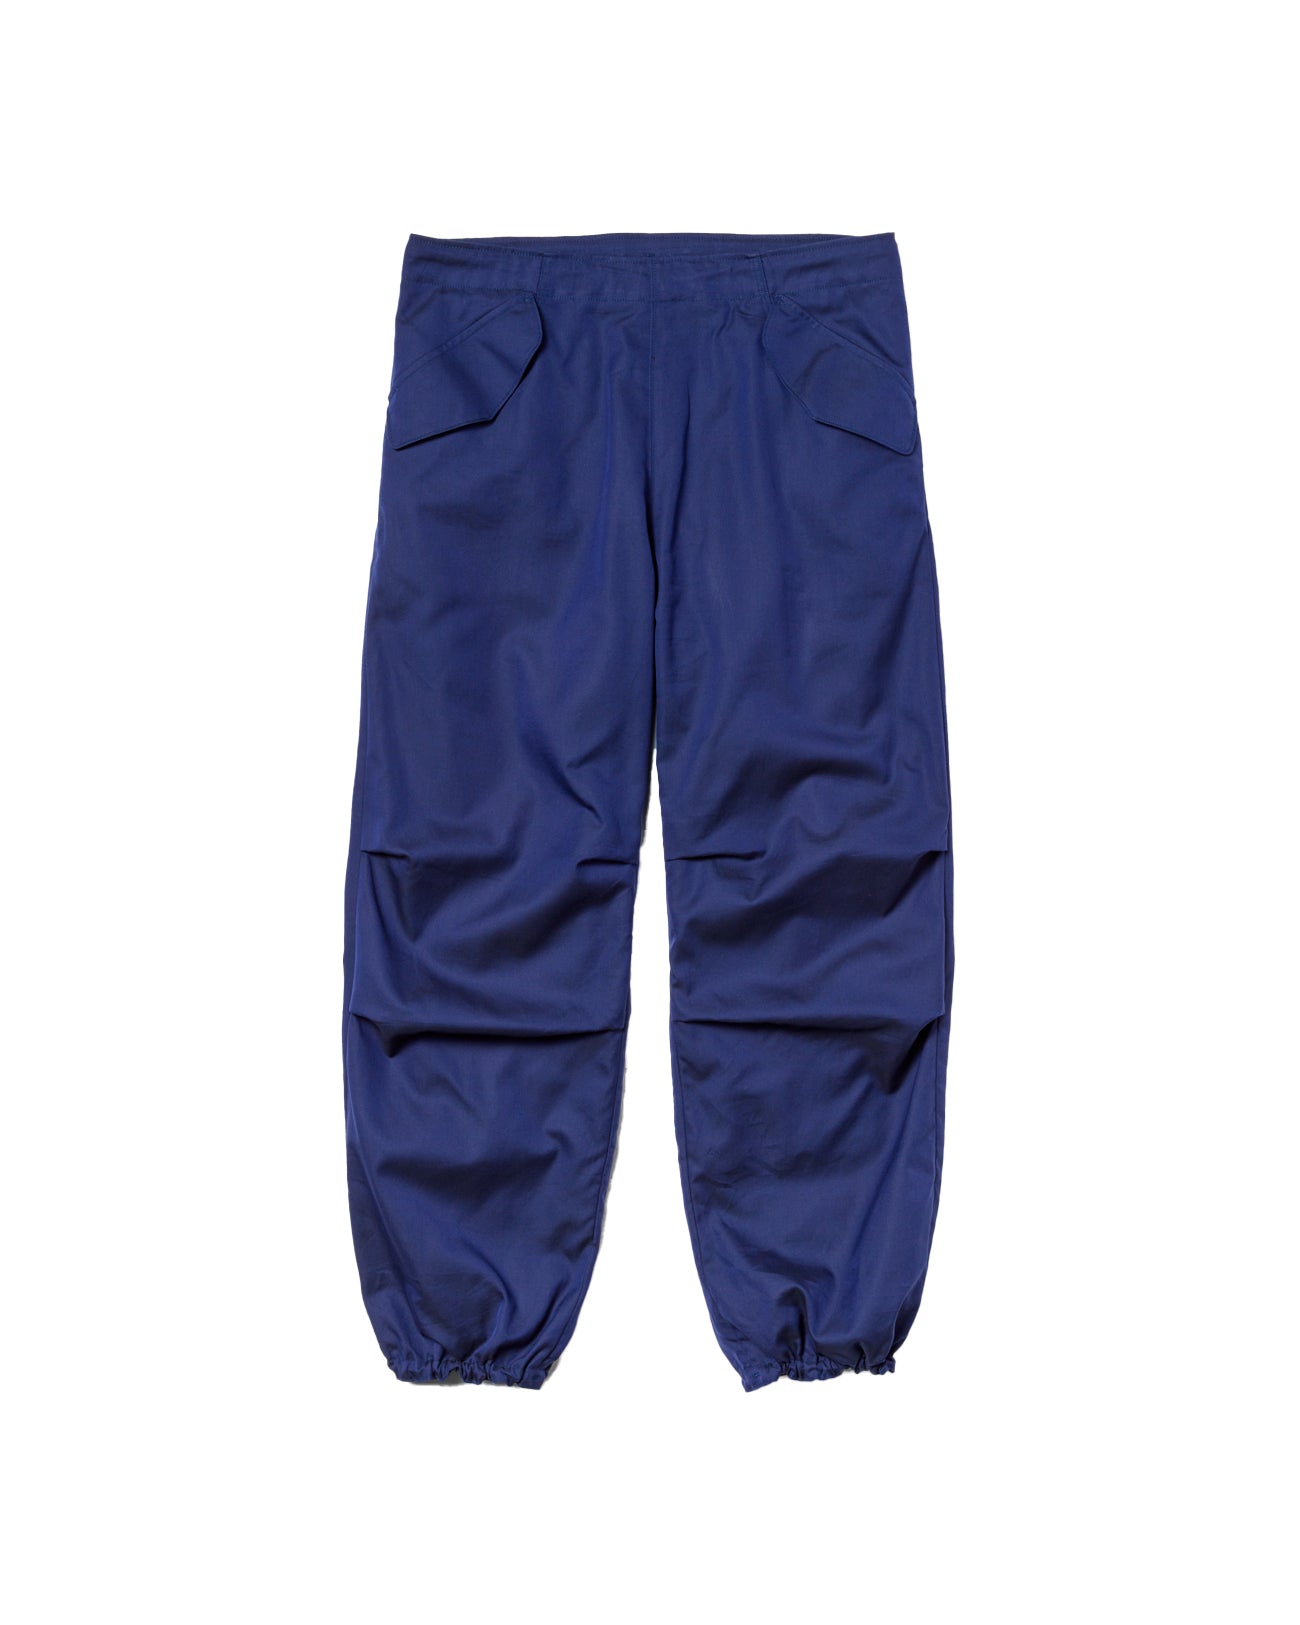 Finx OX New M65 Trousers - navy – FAB4 ONLINE STORE